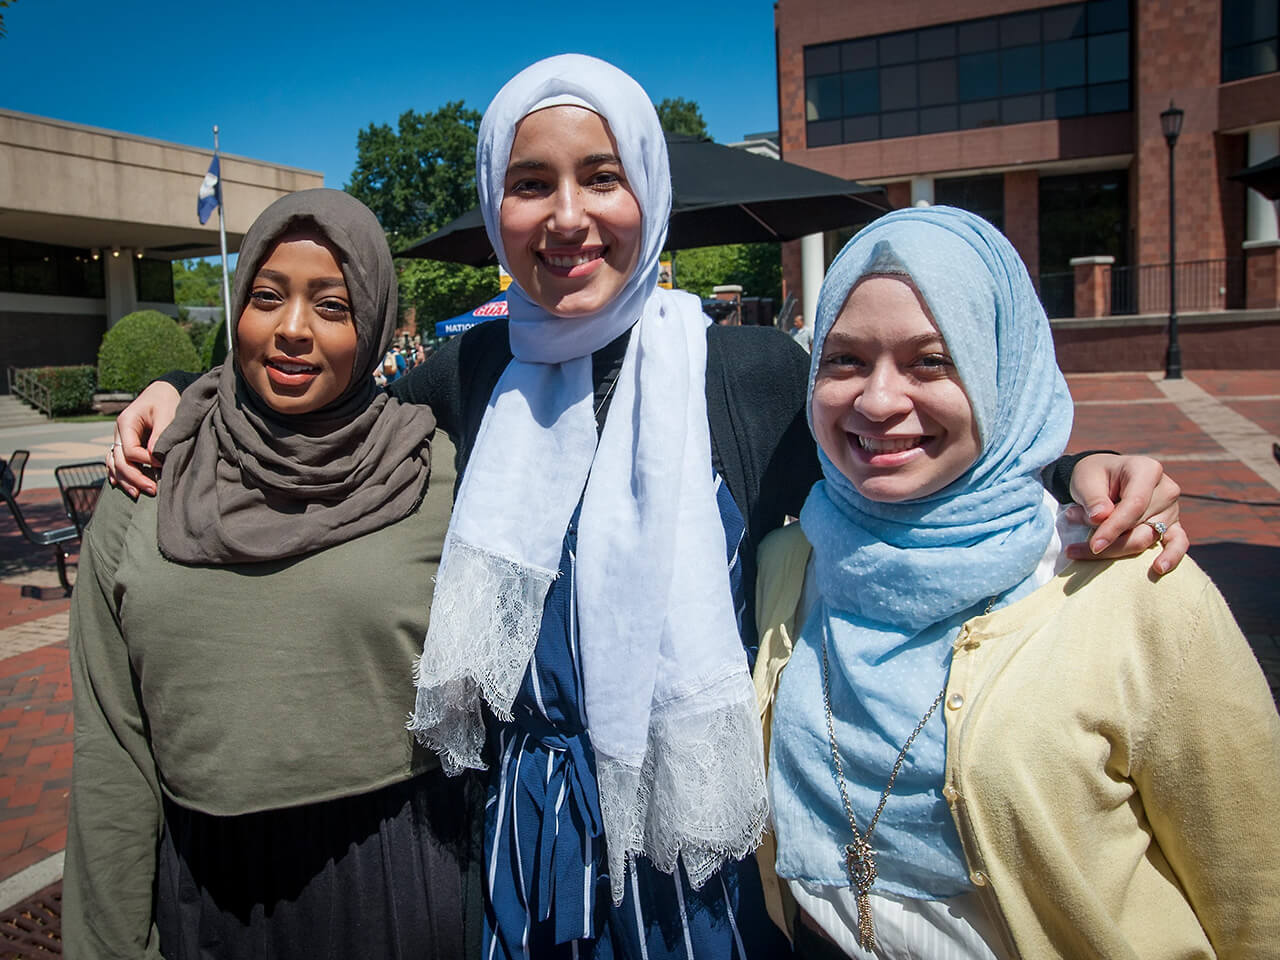 Three females with hijabs smile together outside